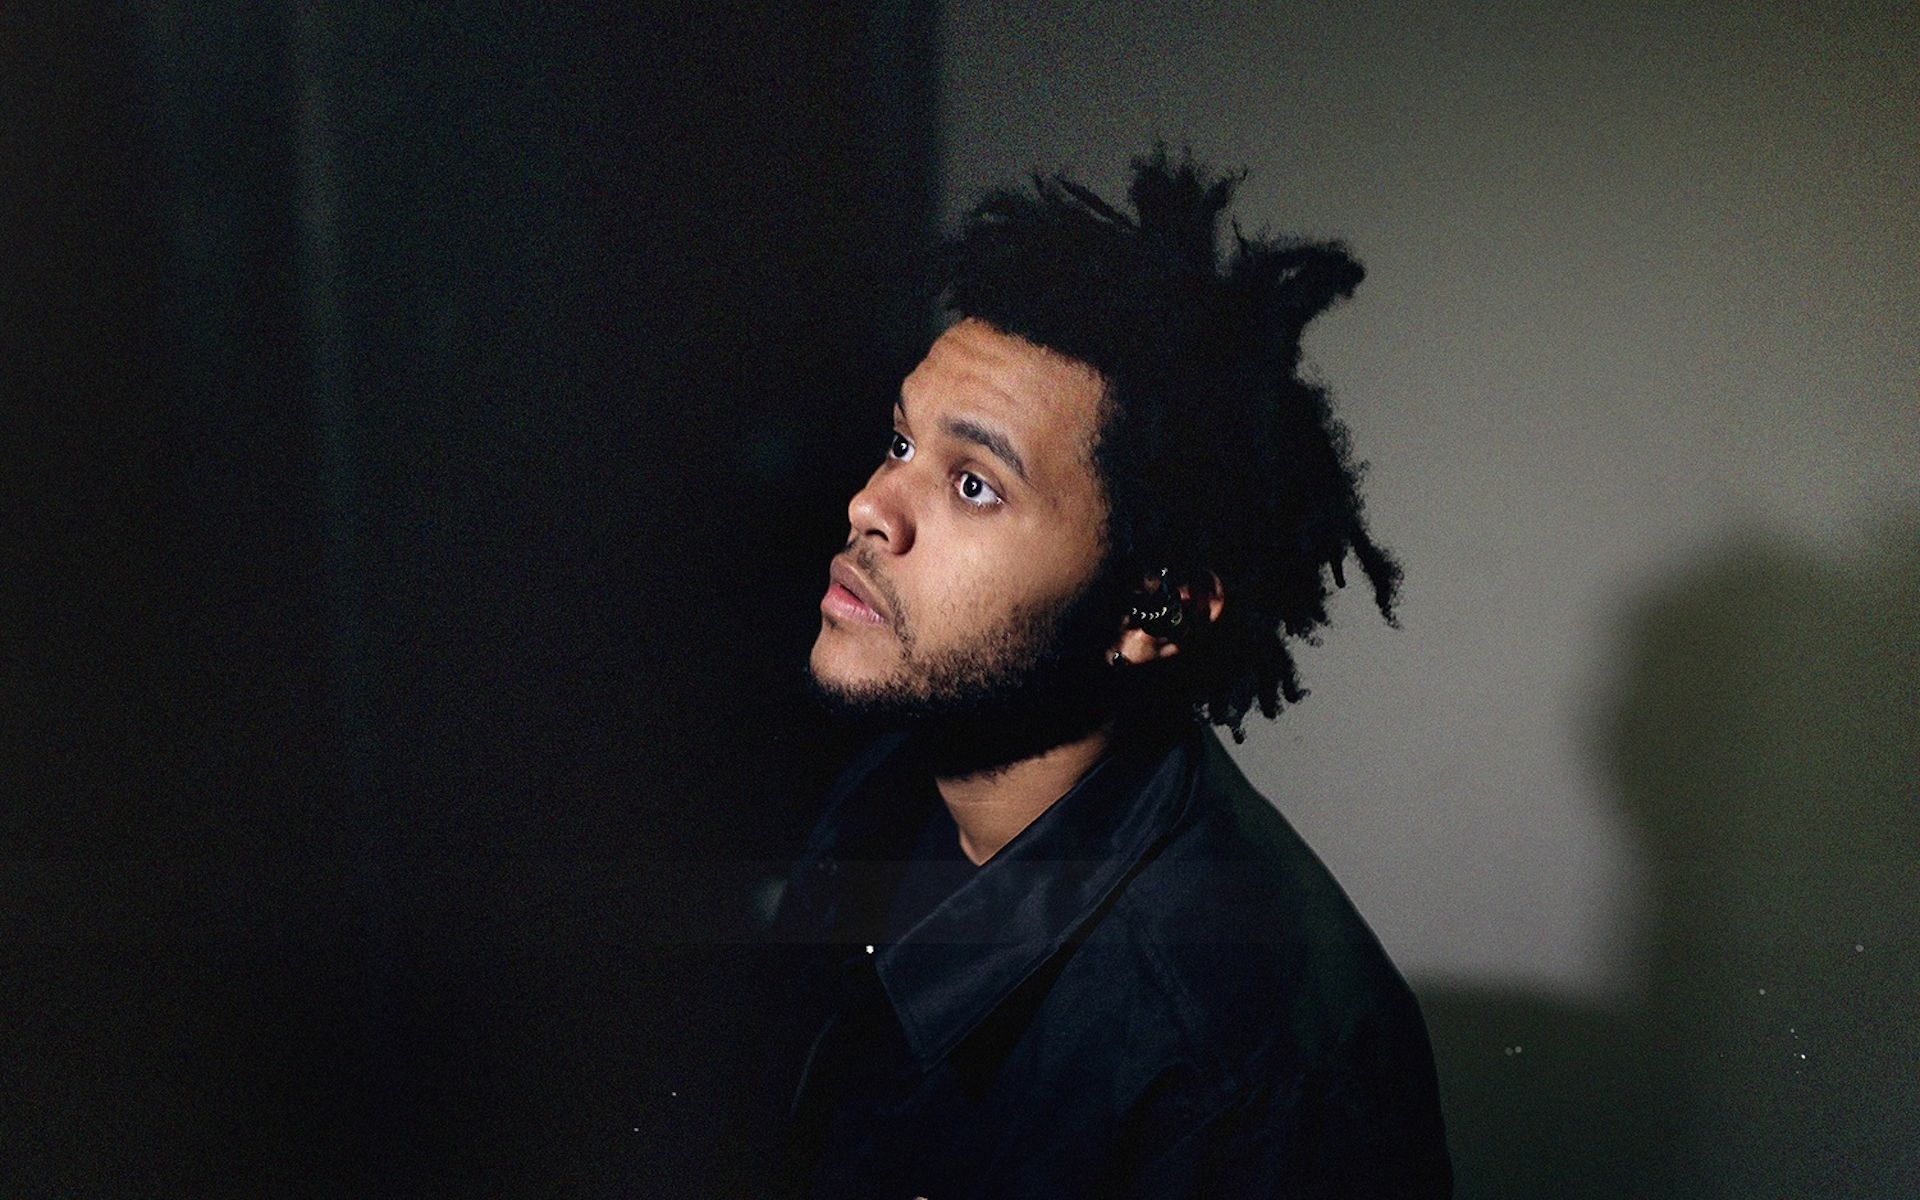 The weekend come through перевод. The Weeknd. Weekend. The Weeknd 2015.